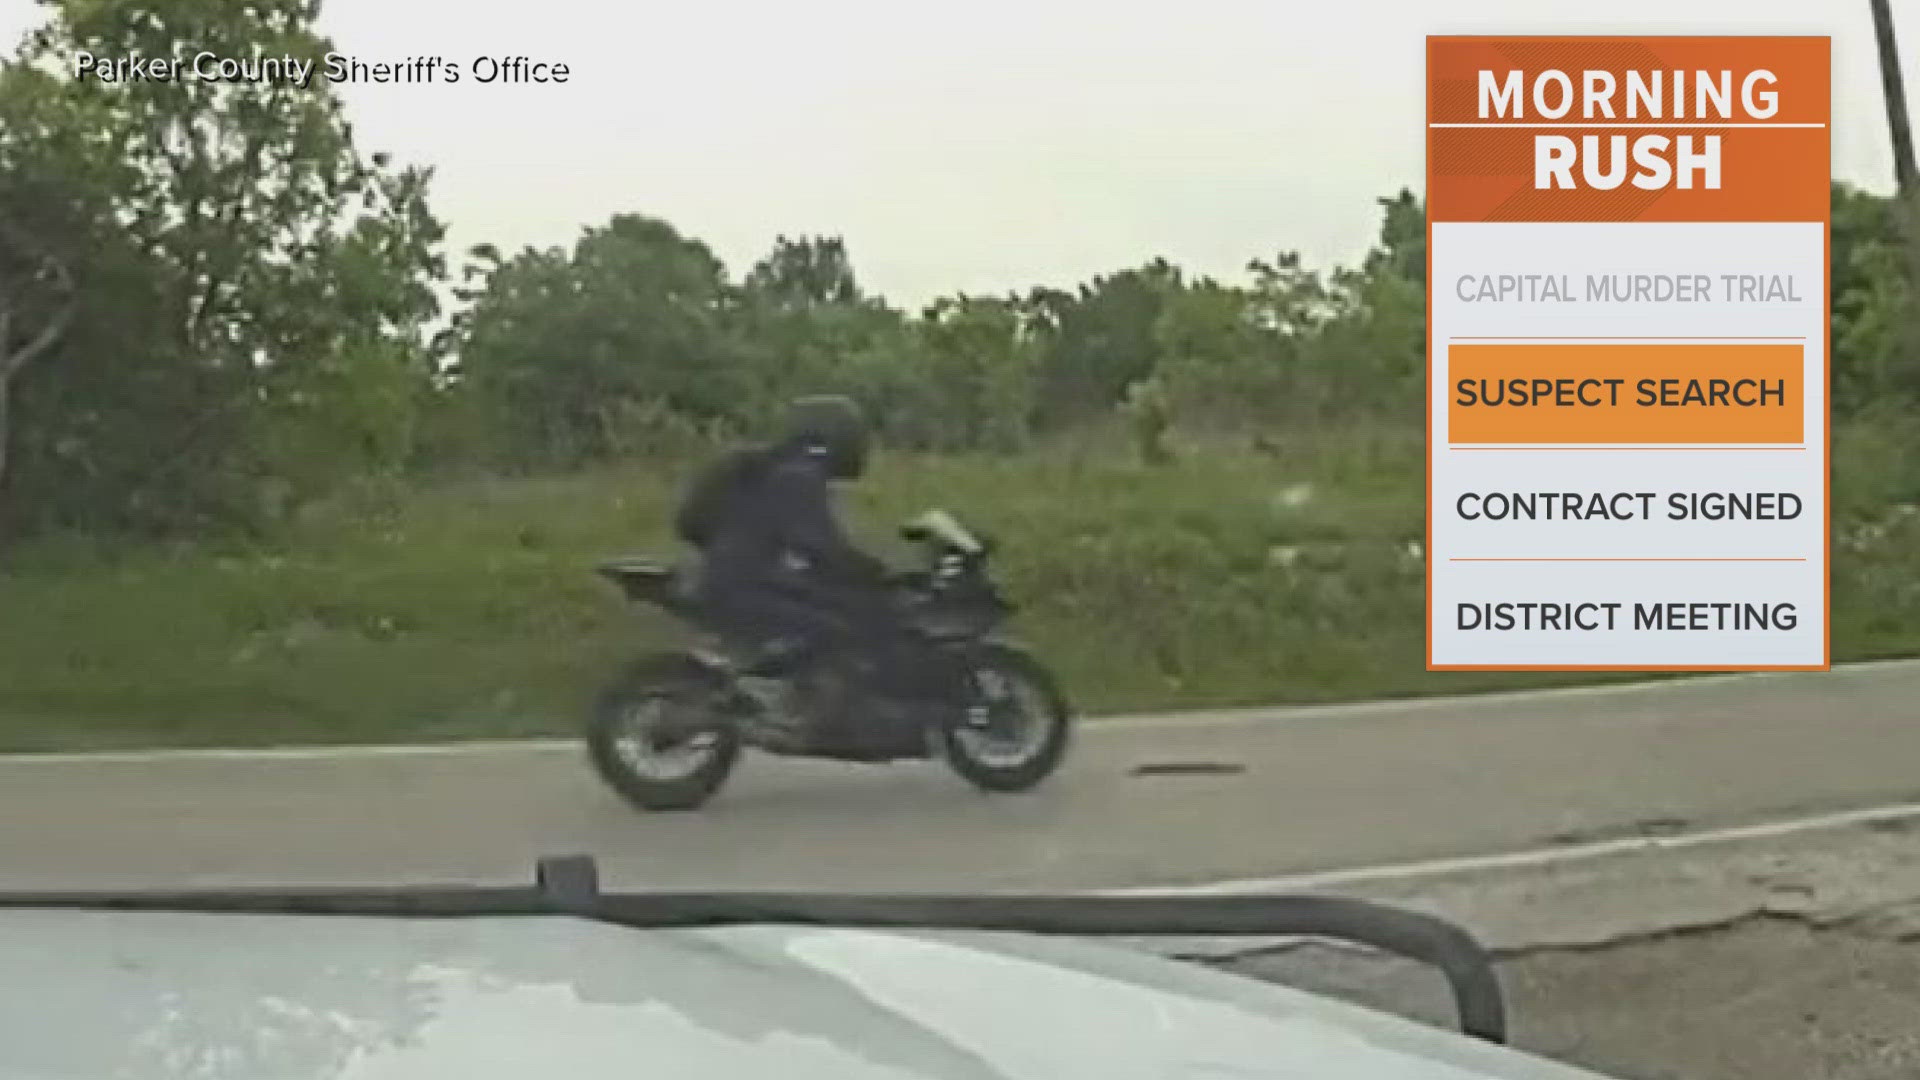 Crime stoppers is offering $1,000 for information. The motorcyclist is always wearing a helmet.